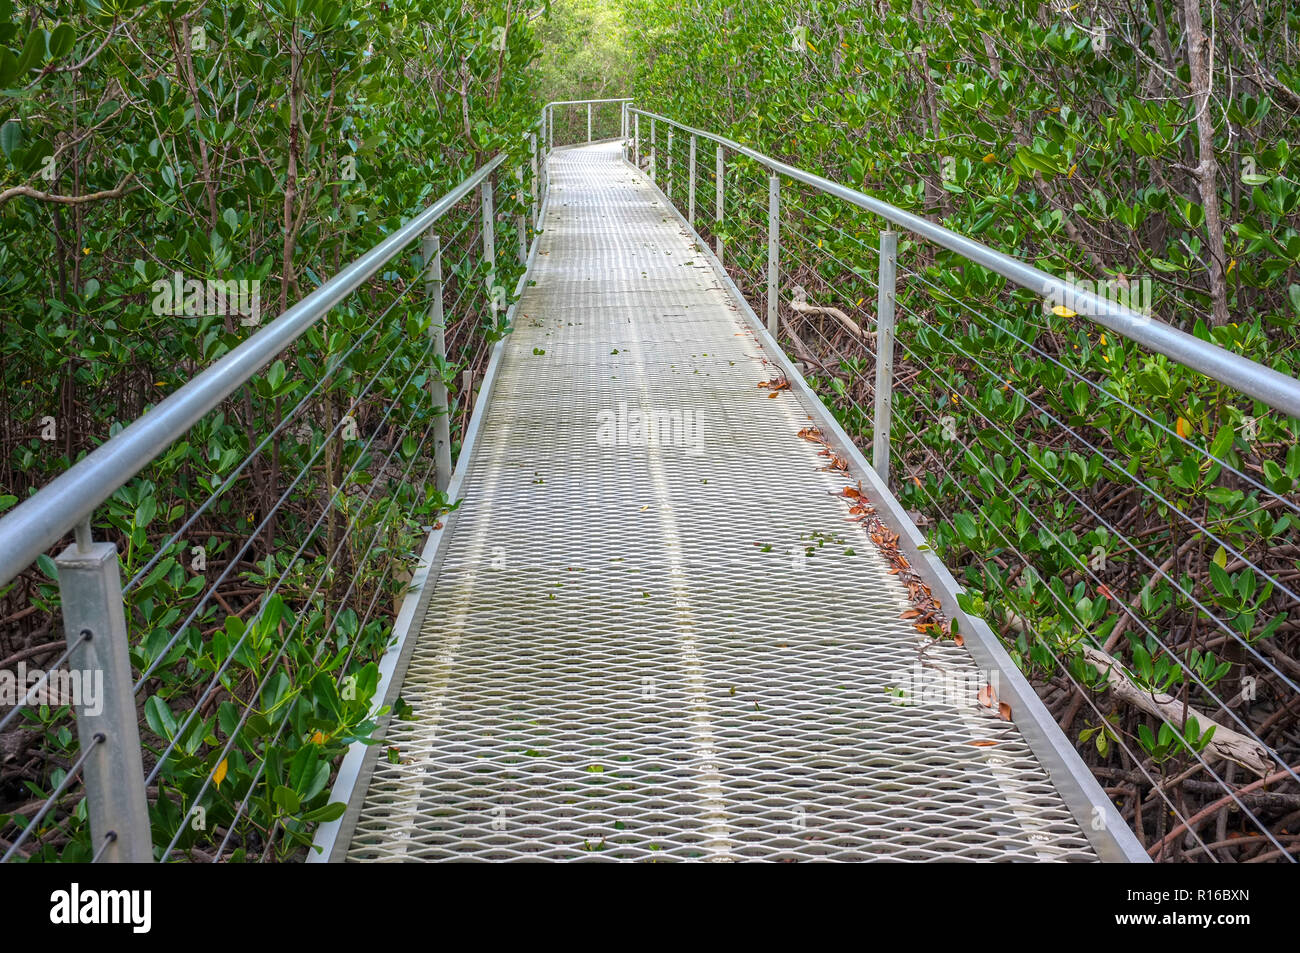 The East Point Mangrove board walk in the suburb of Darwin city in the Northern Territory of Australia. Stock Photo